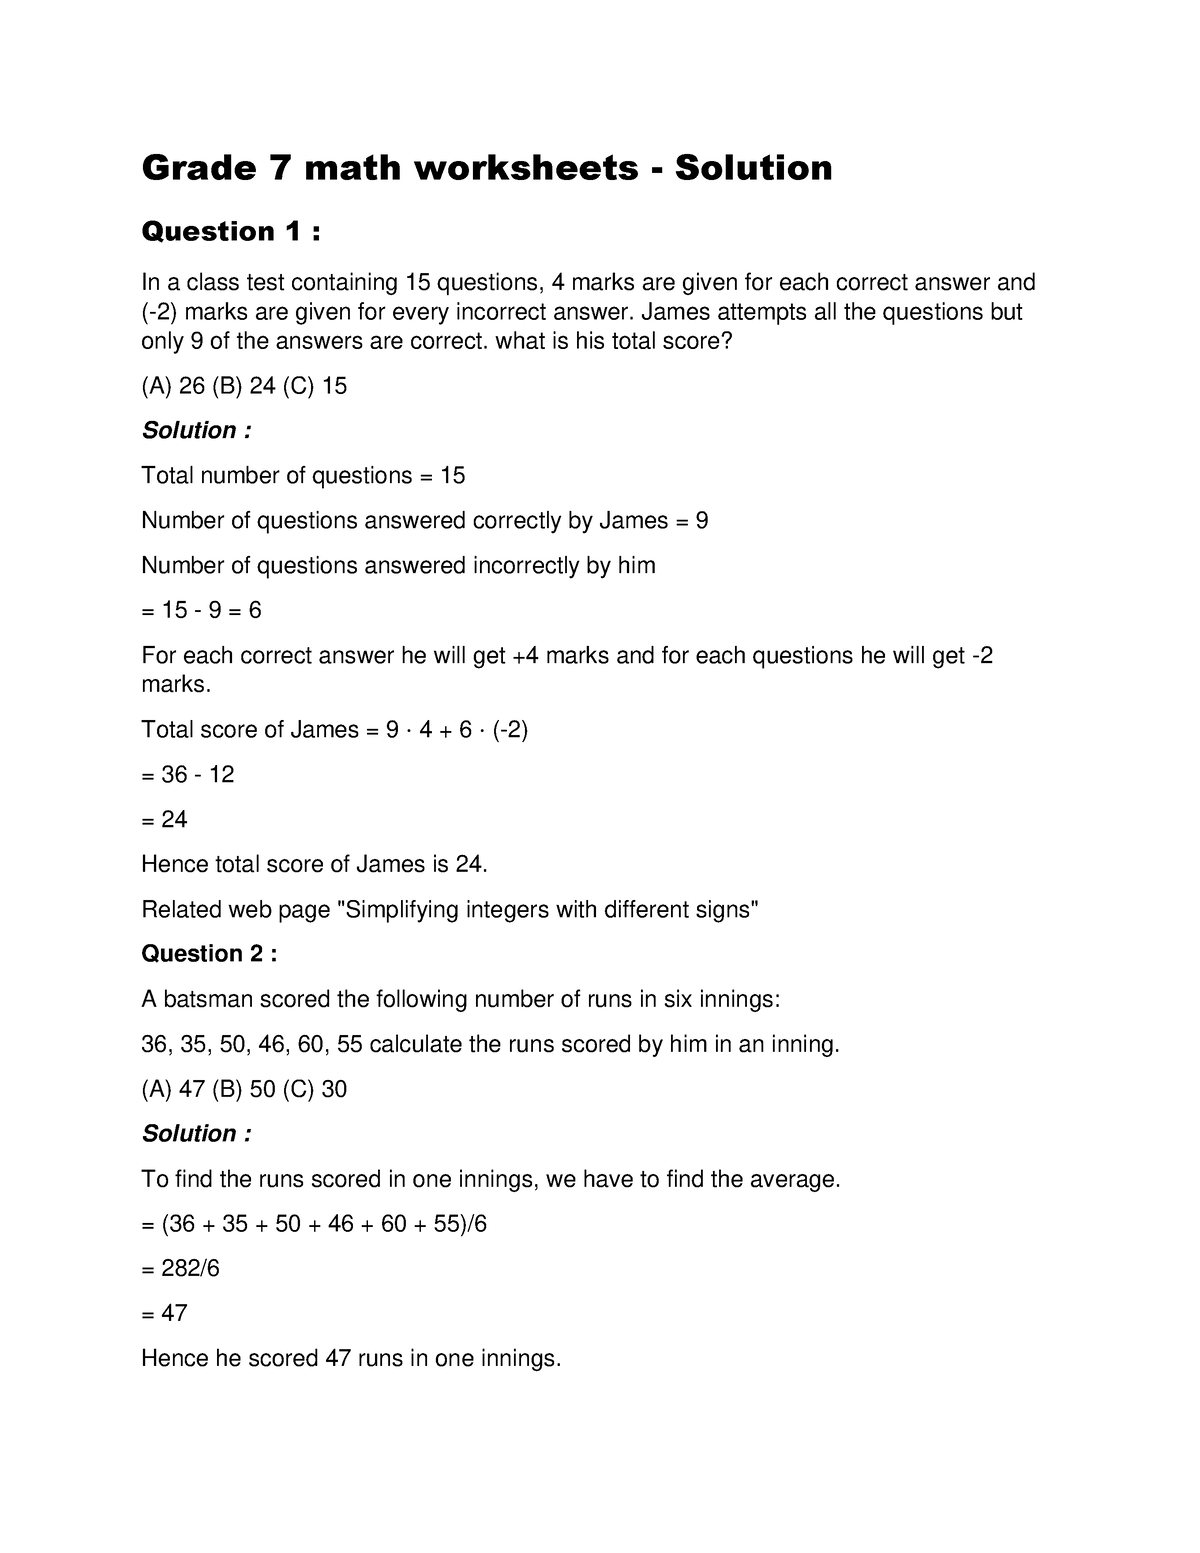 Grade 7 Math Worksheets Grade 7 Math Worksheets Solution Question 1 In A Class Test